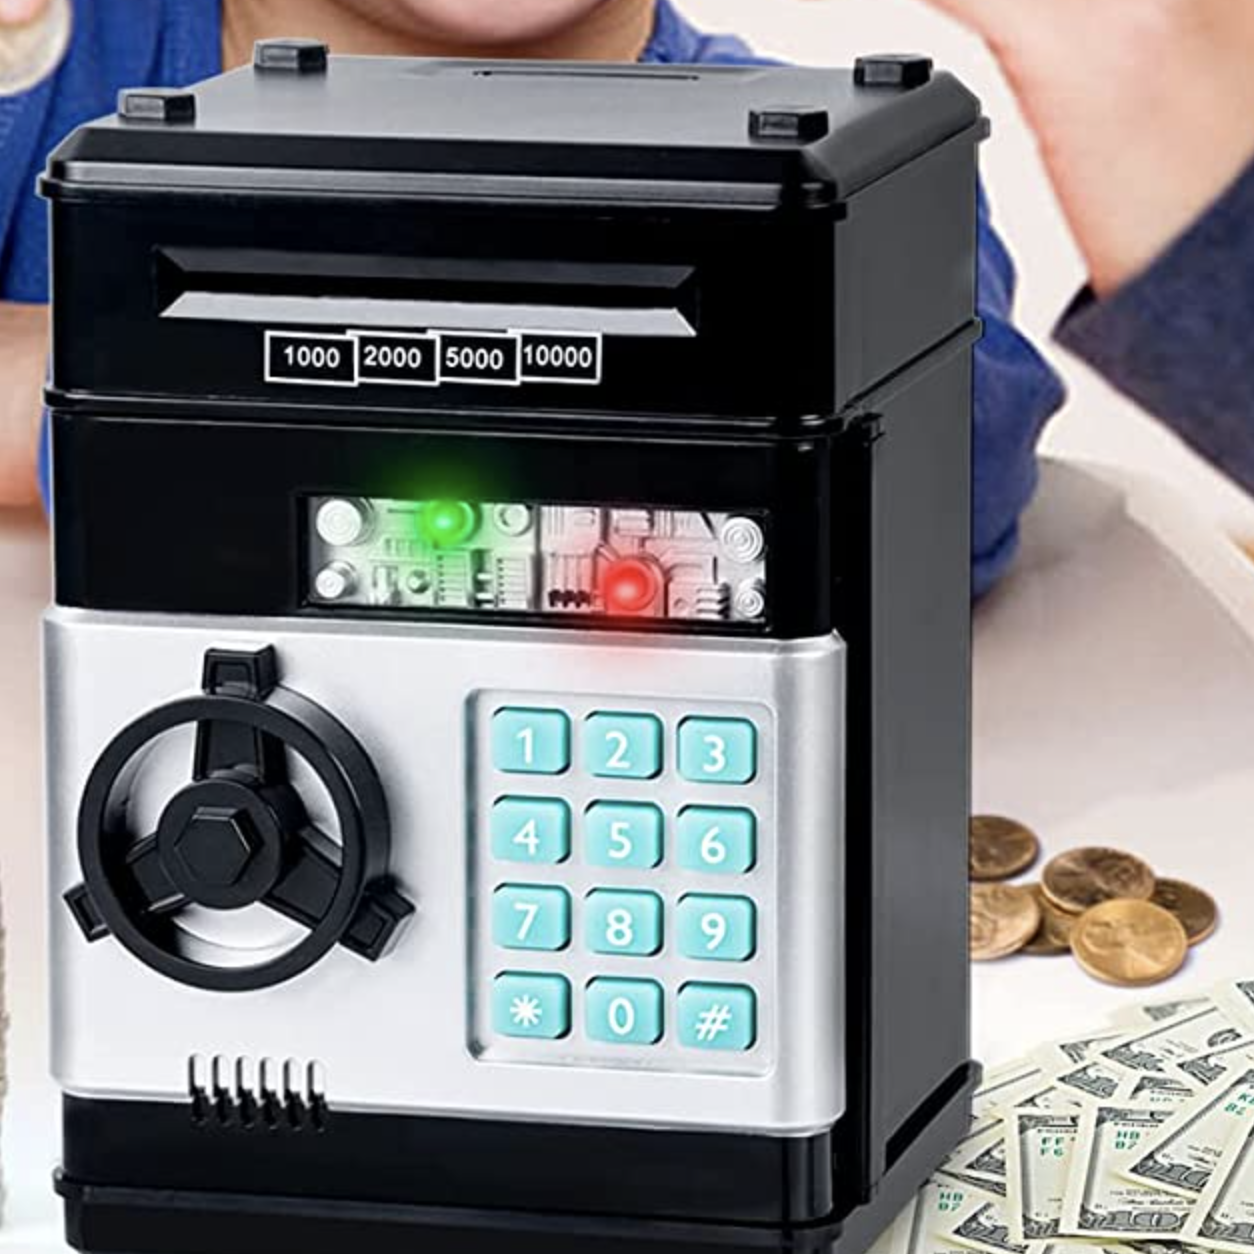 the safe on a table surrounded by coins and paper money